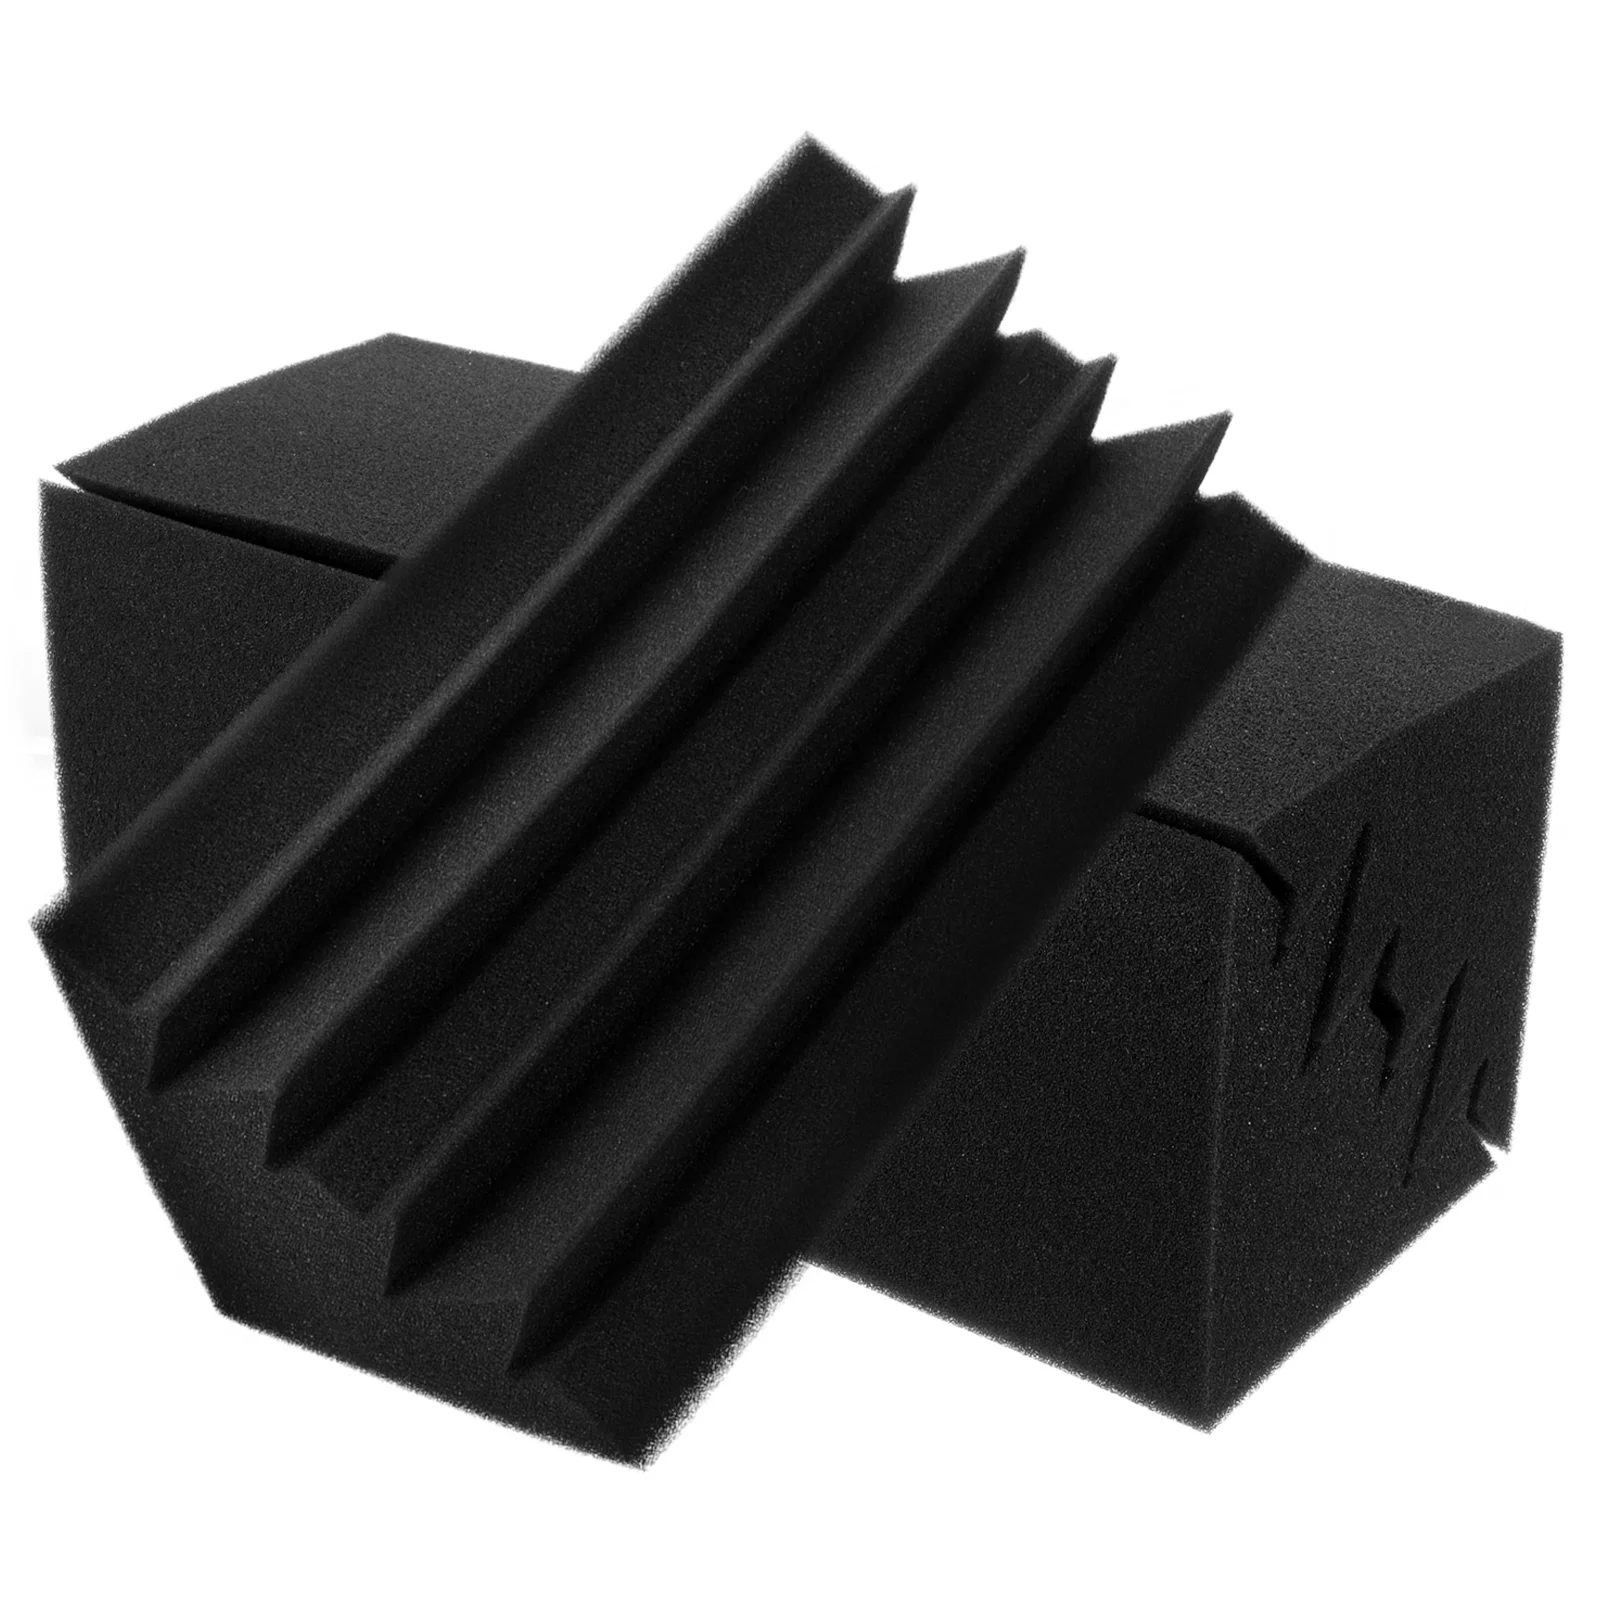 

3 Pcs Sound Proofing Panels Wall Padding Indoor Walls Acoustic Tiles Soundproofing Sponge Isolation Pads Corner Bass Trap